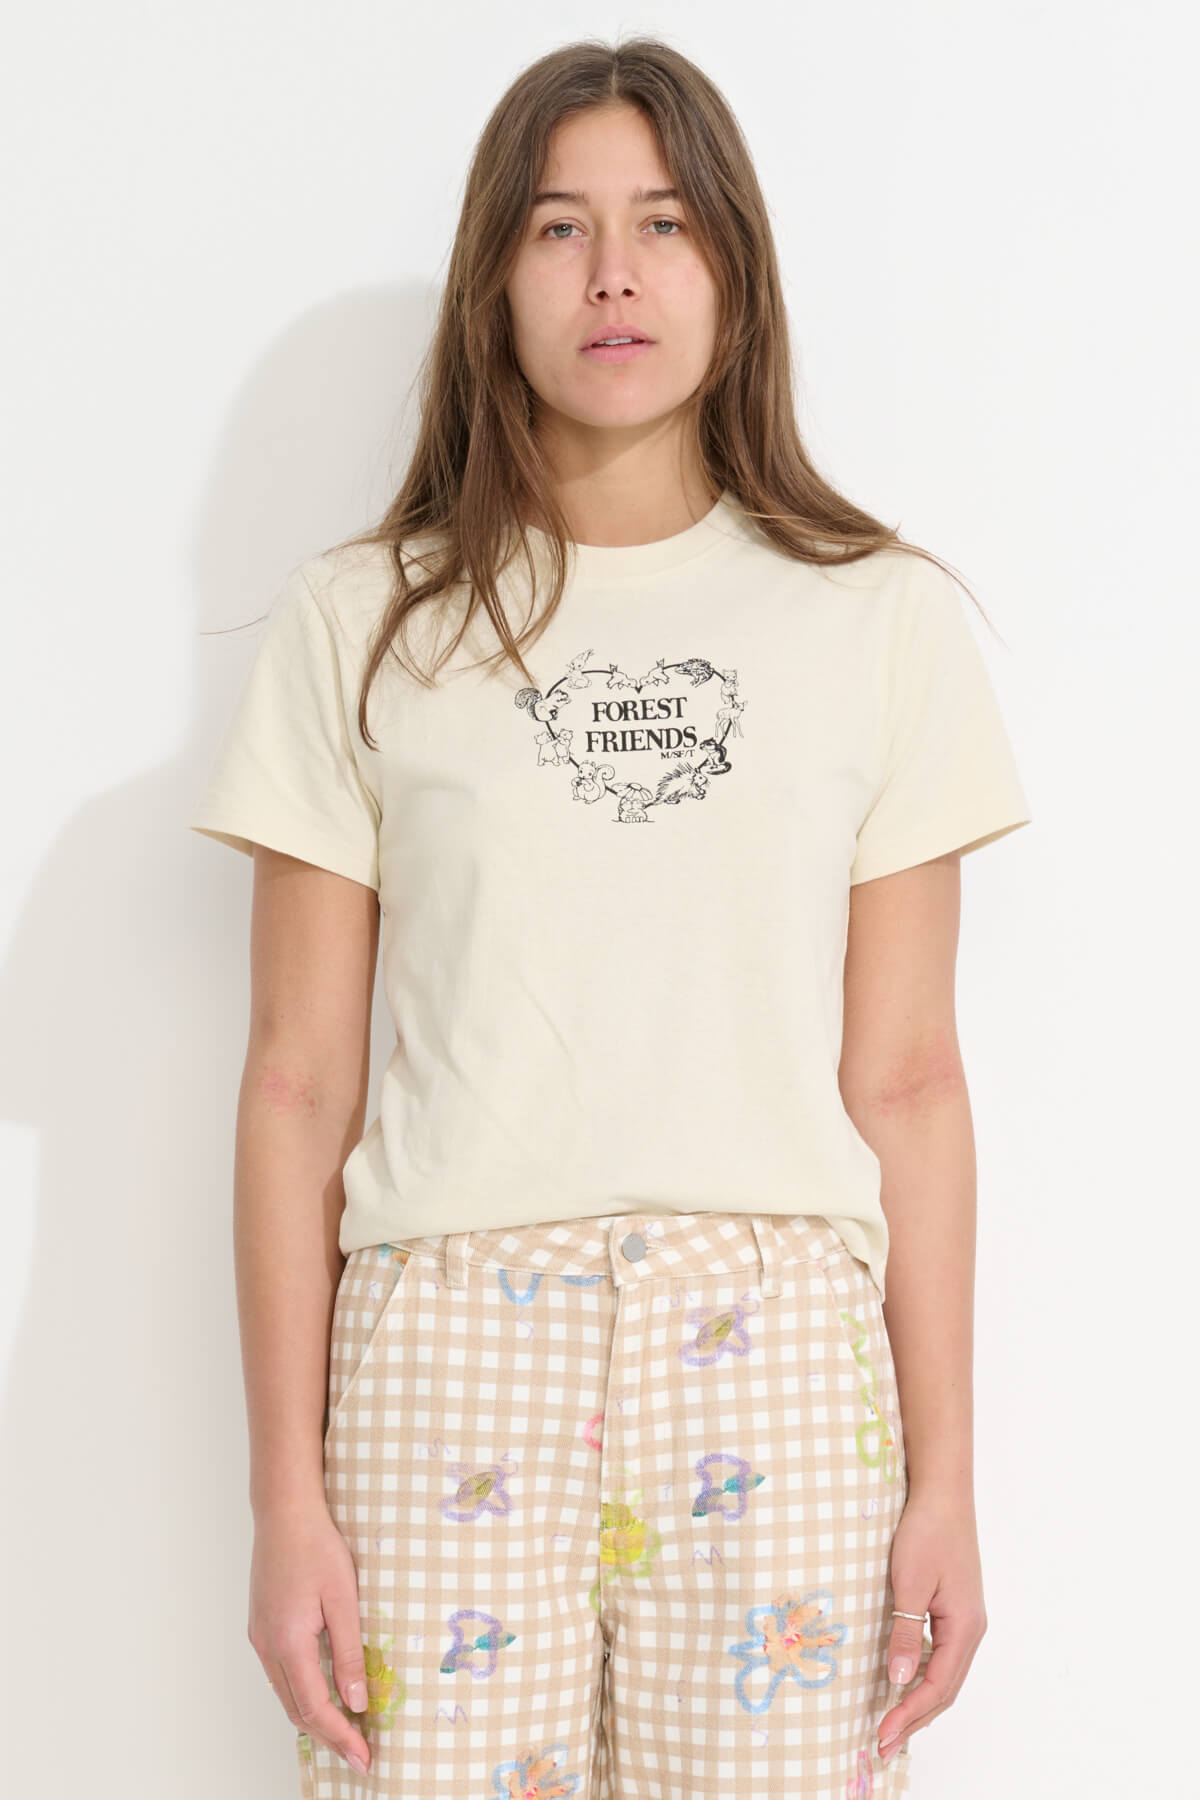 Misfit Shapes - Forest Friends Baby Tee - Cream